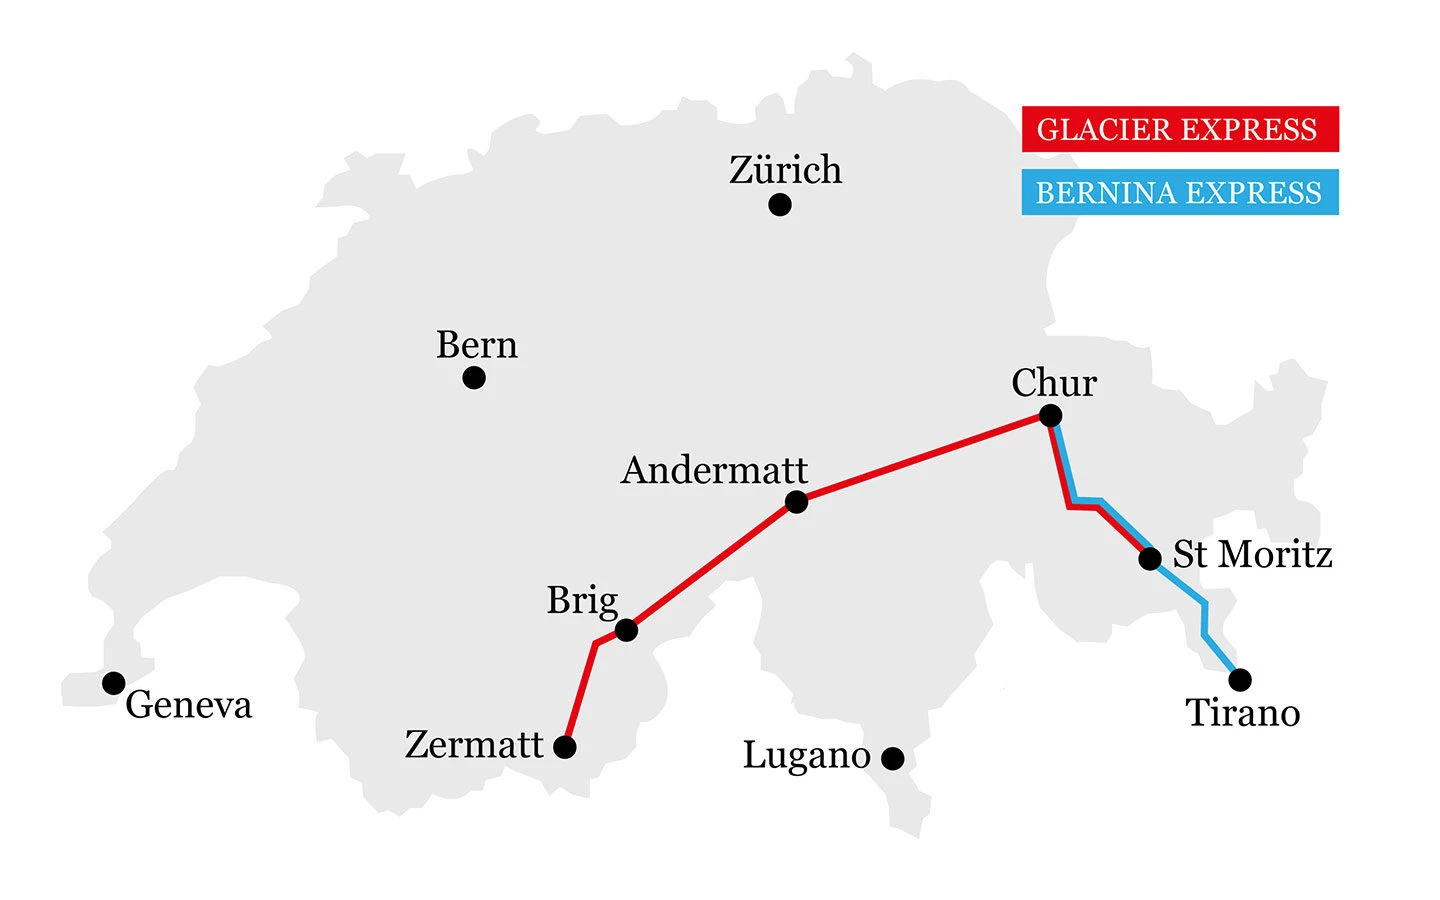 Map of the routes of the Glacier and Bernina Express scenic trains